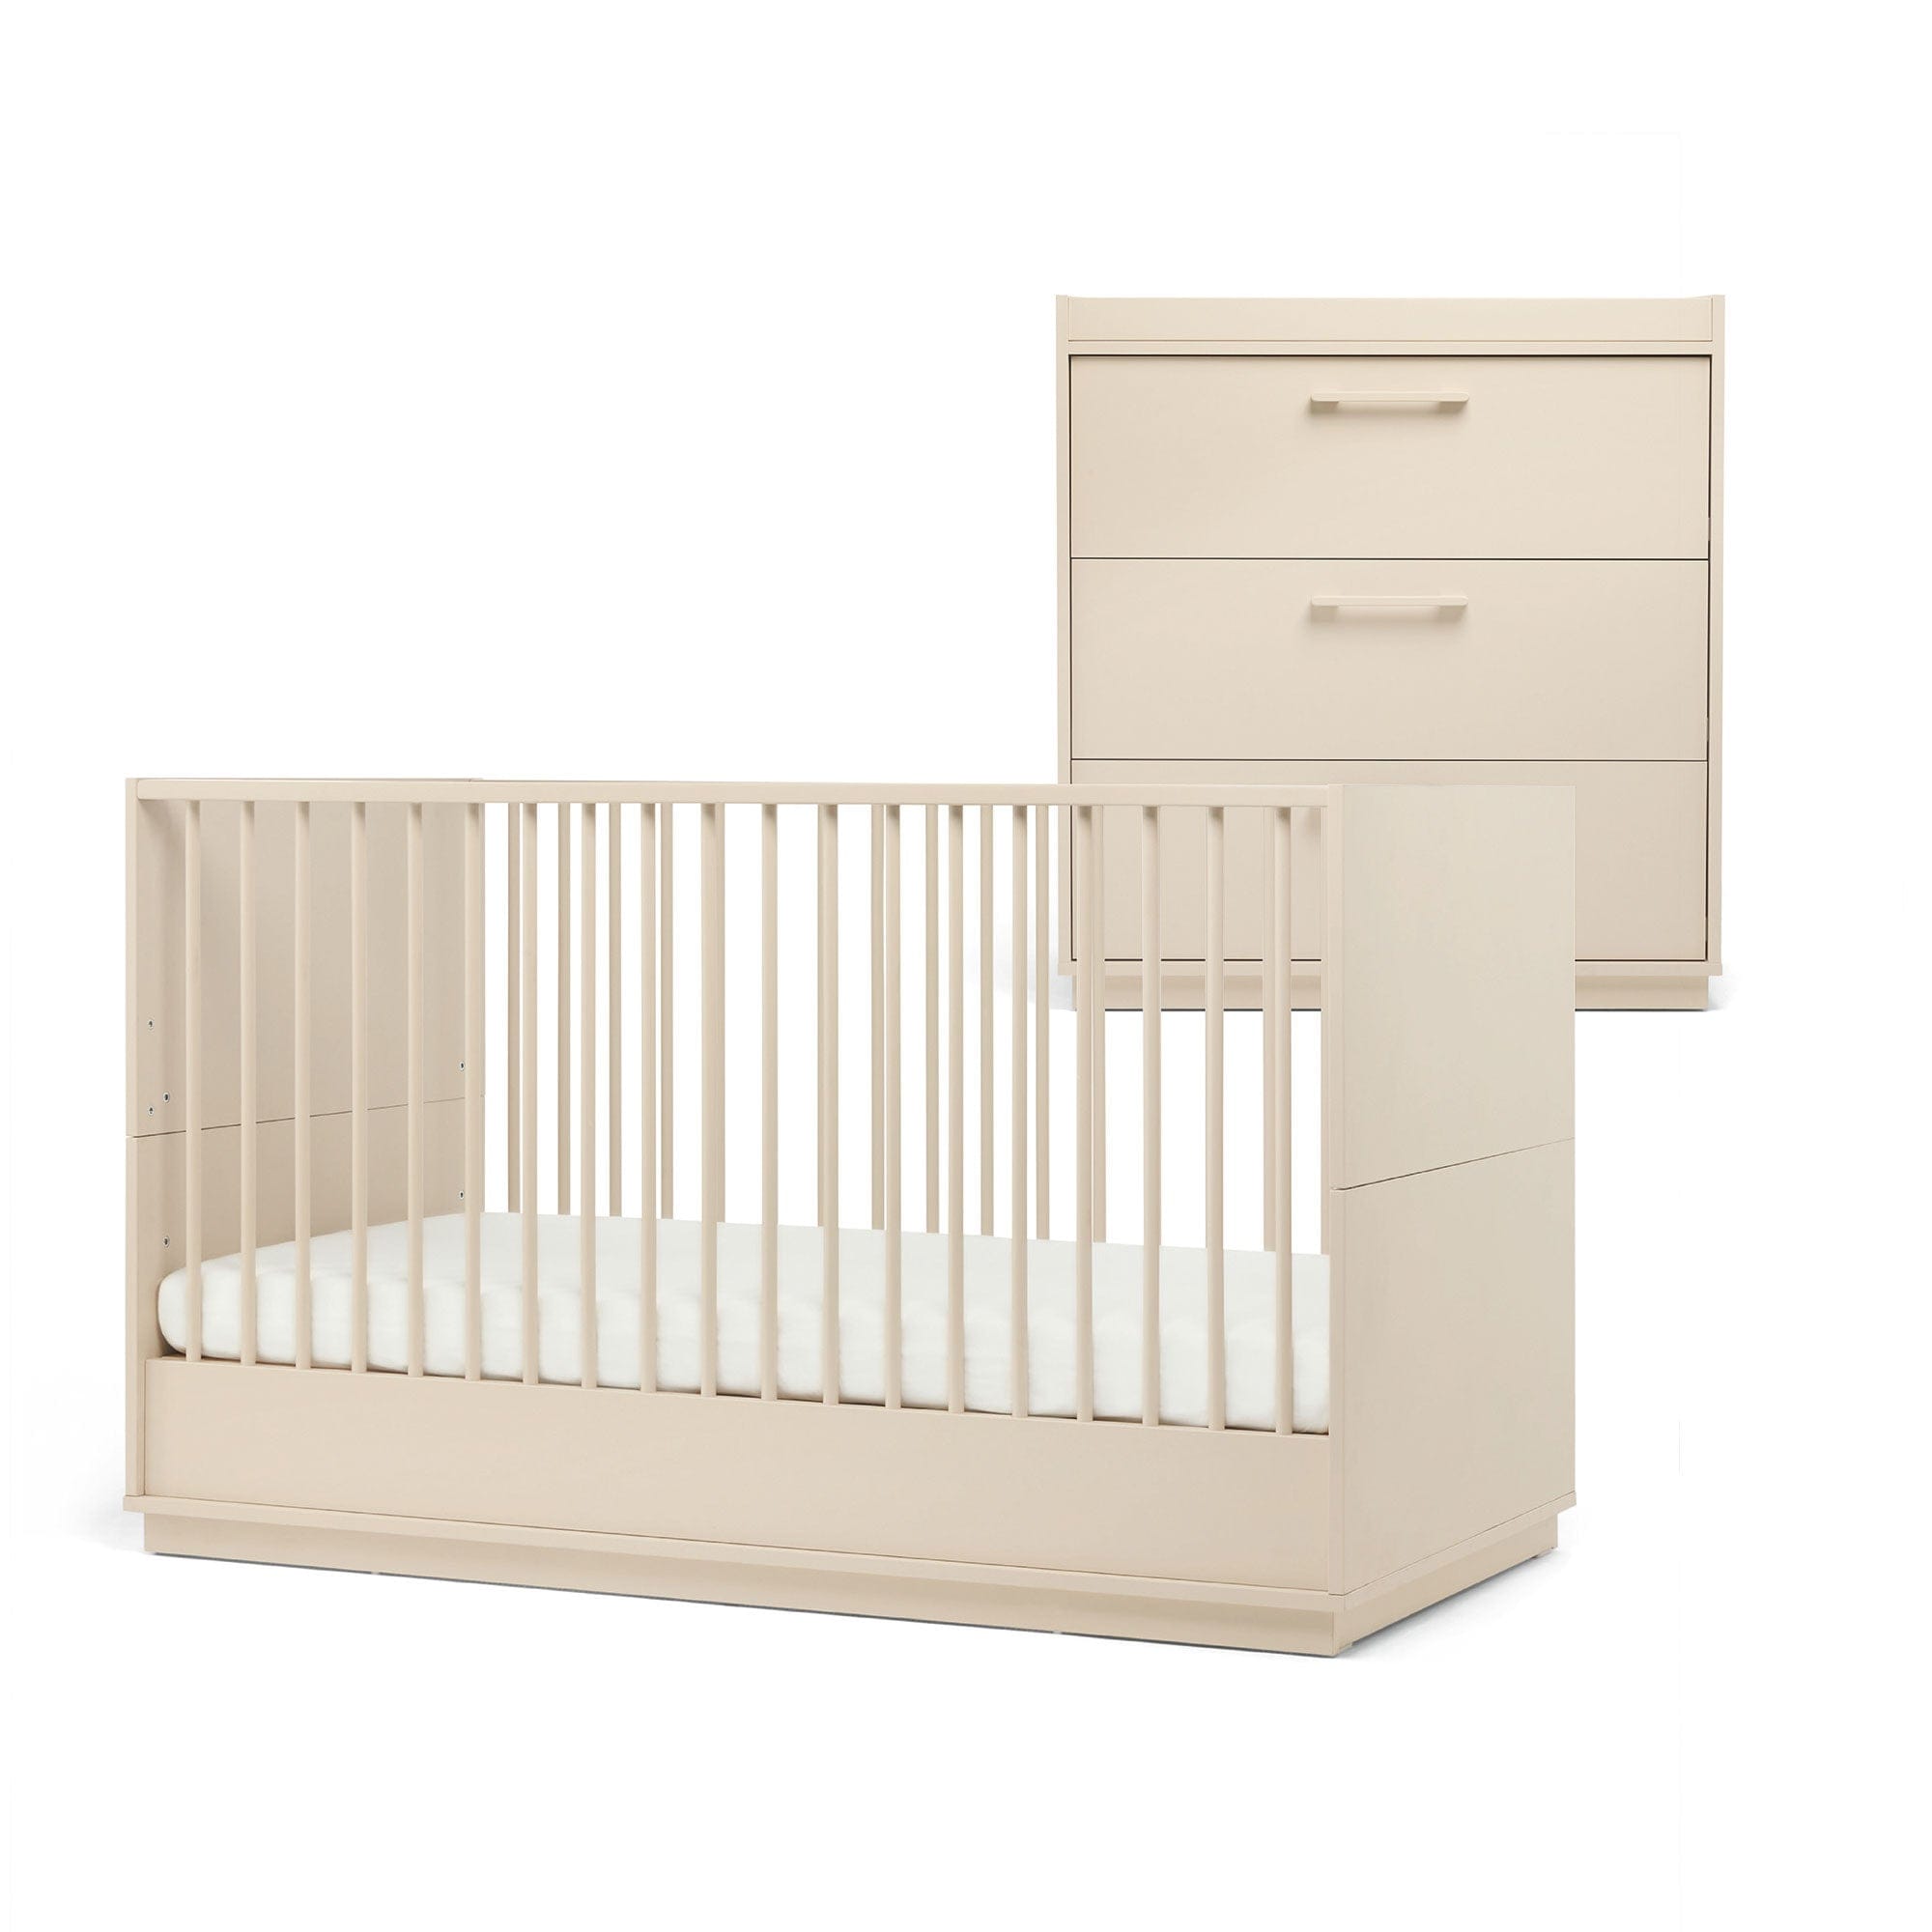 Mamas & Papas Flockton 2 Piece Cotbed Roomset in Cashmere Nursery Room Sets